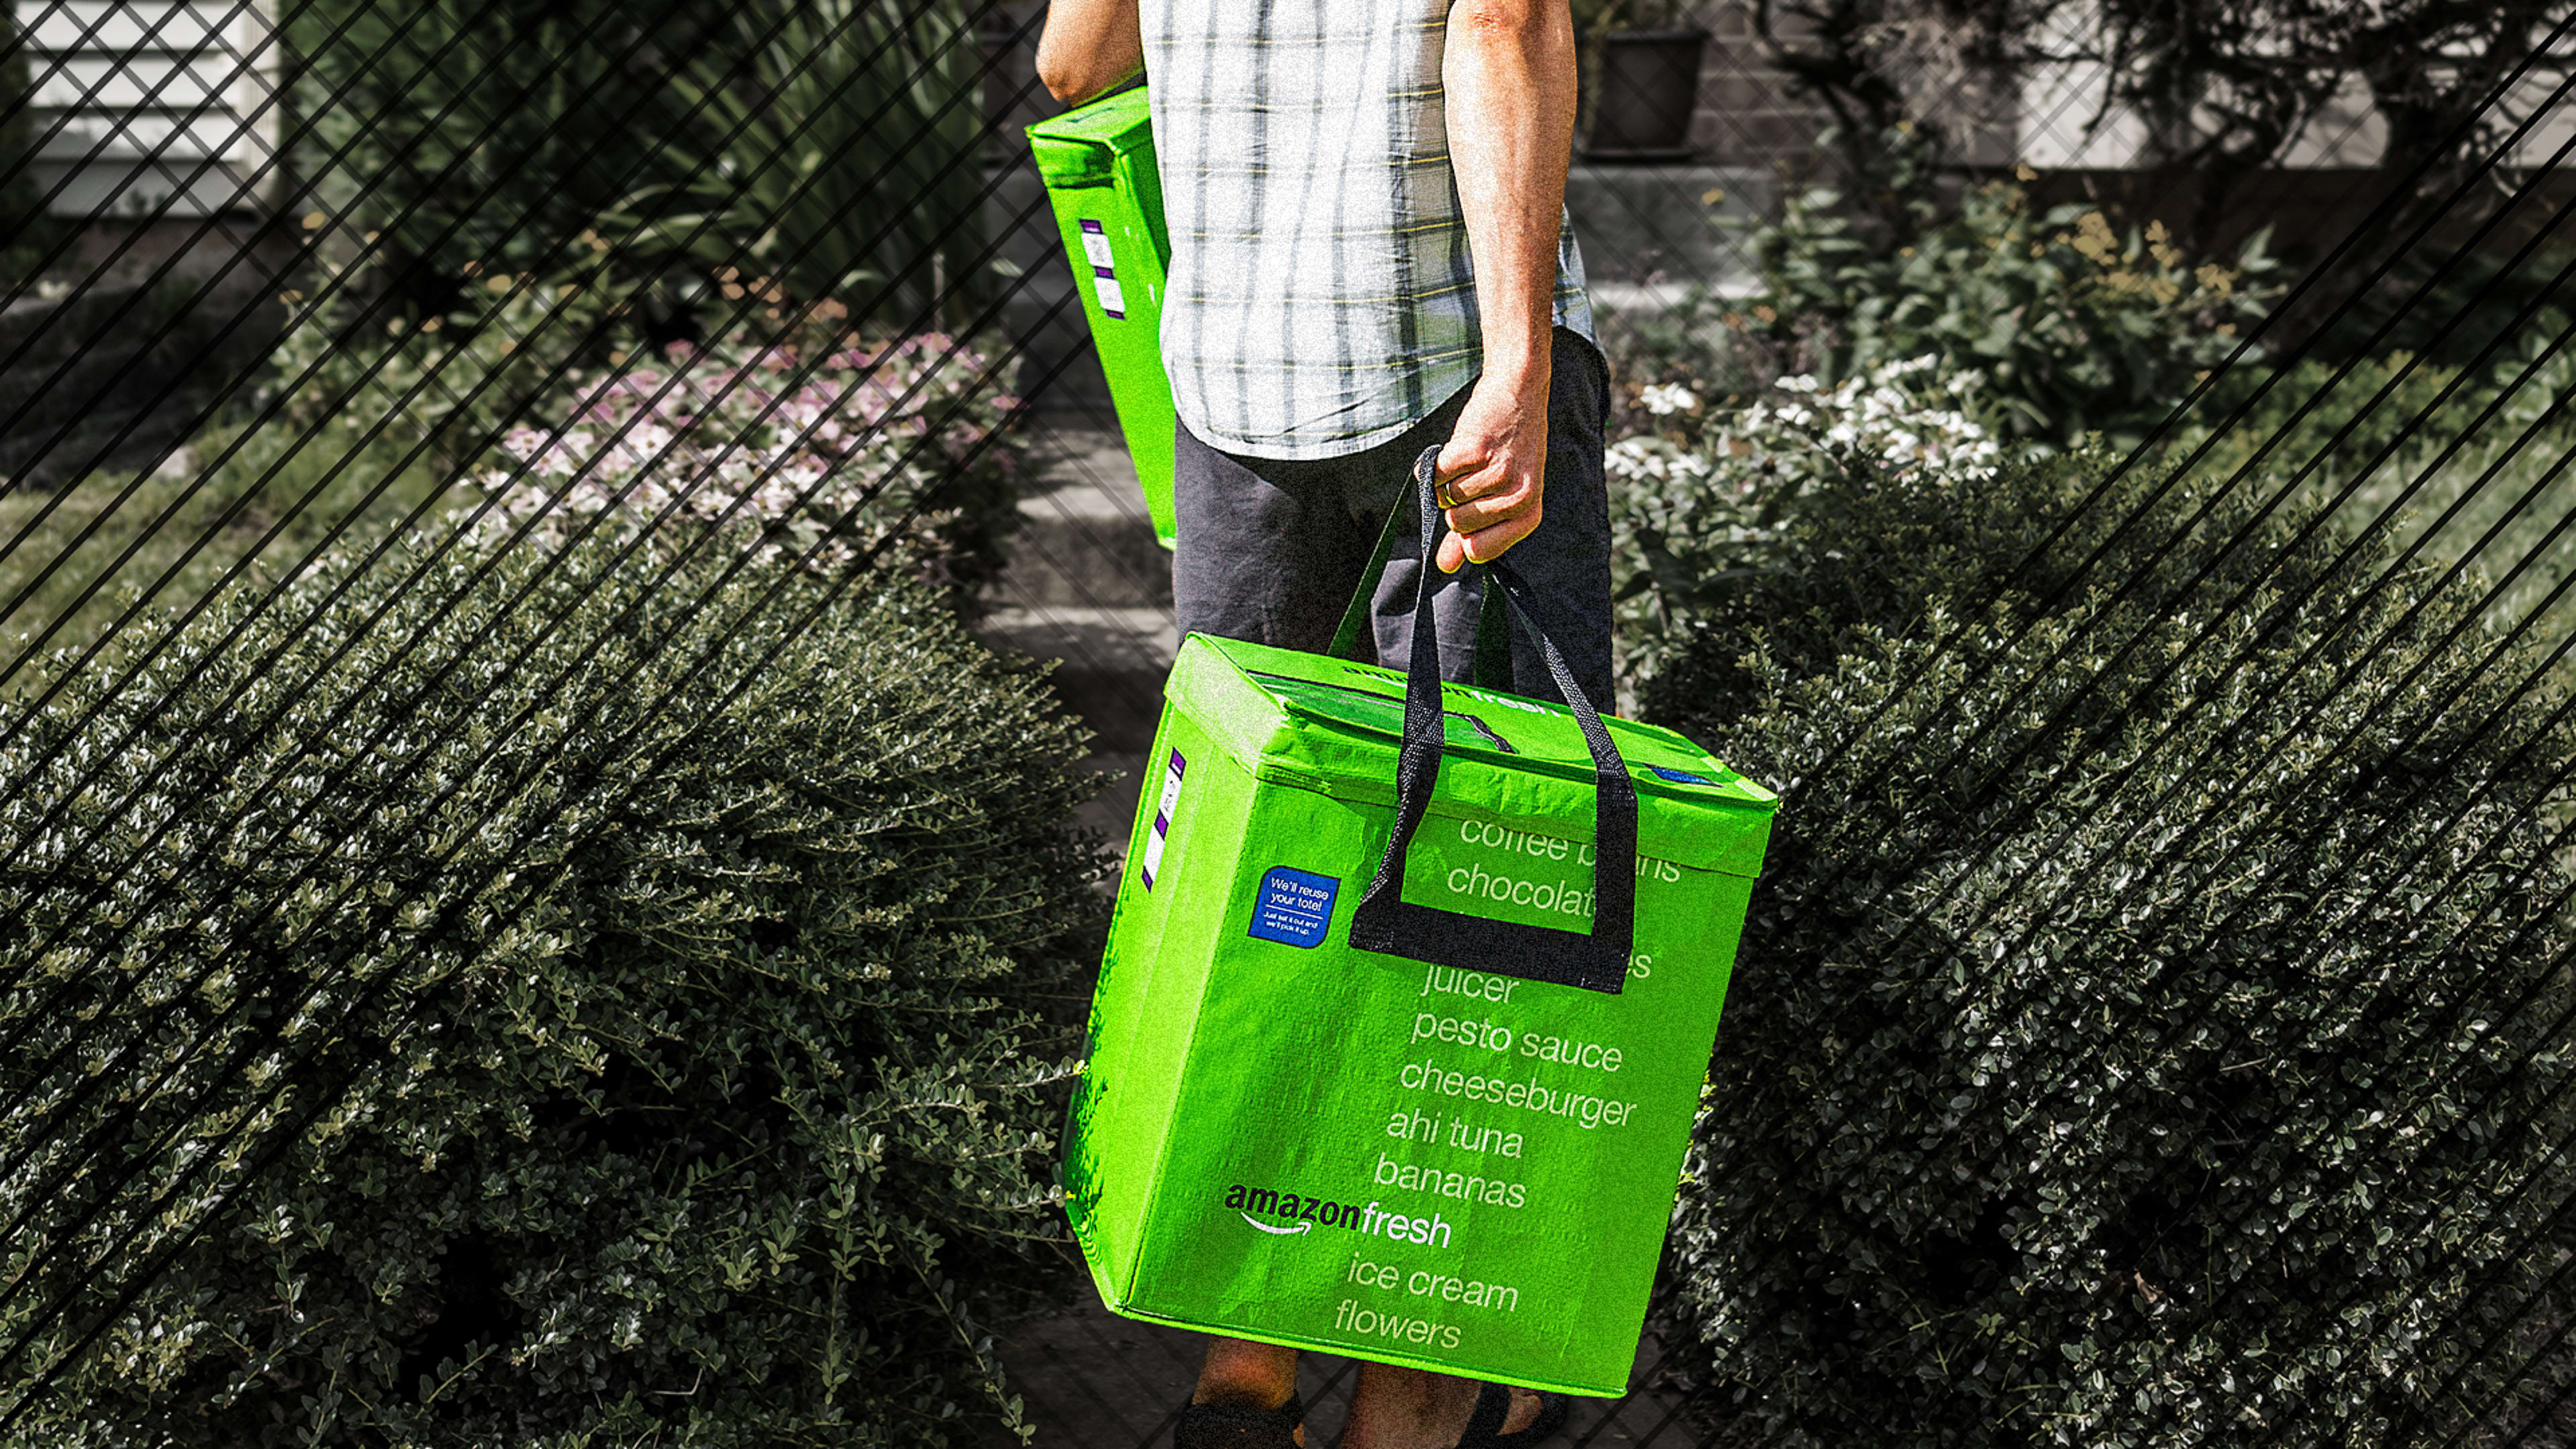 Data shows most Amazon Fresh customers don’t shop at Whole Foods—and that’s good for Amazon